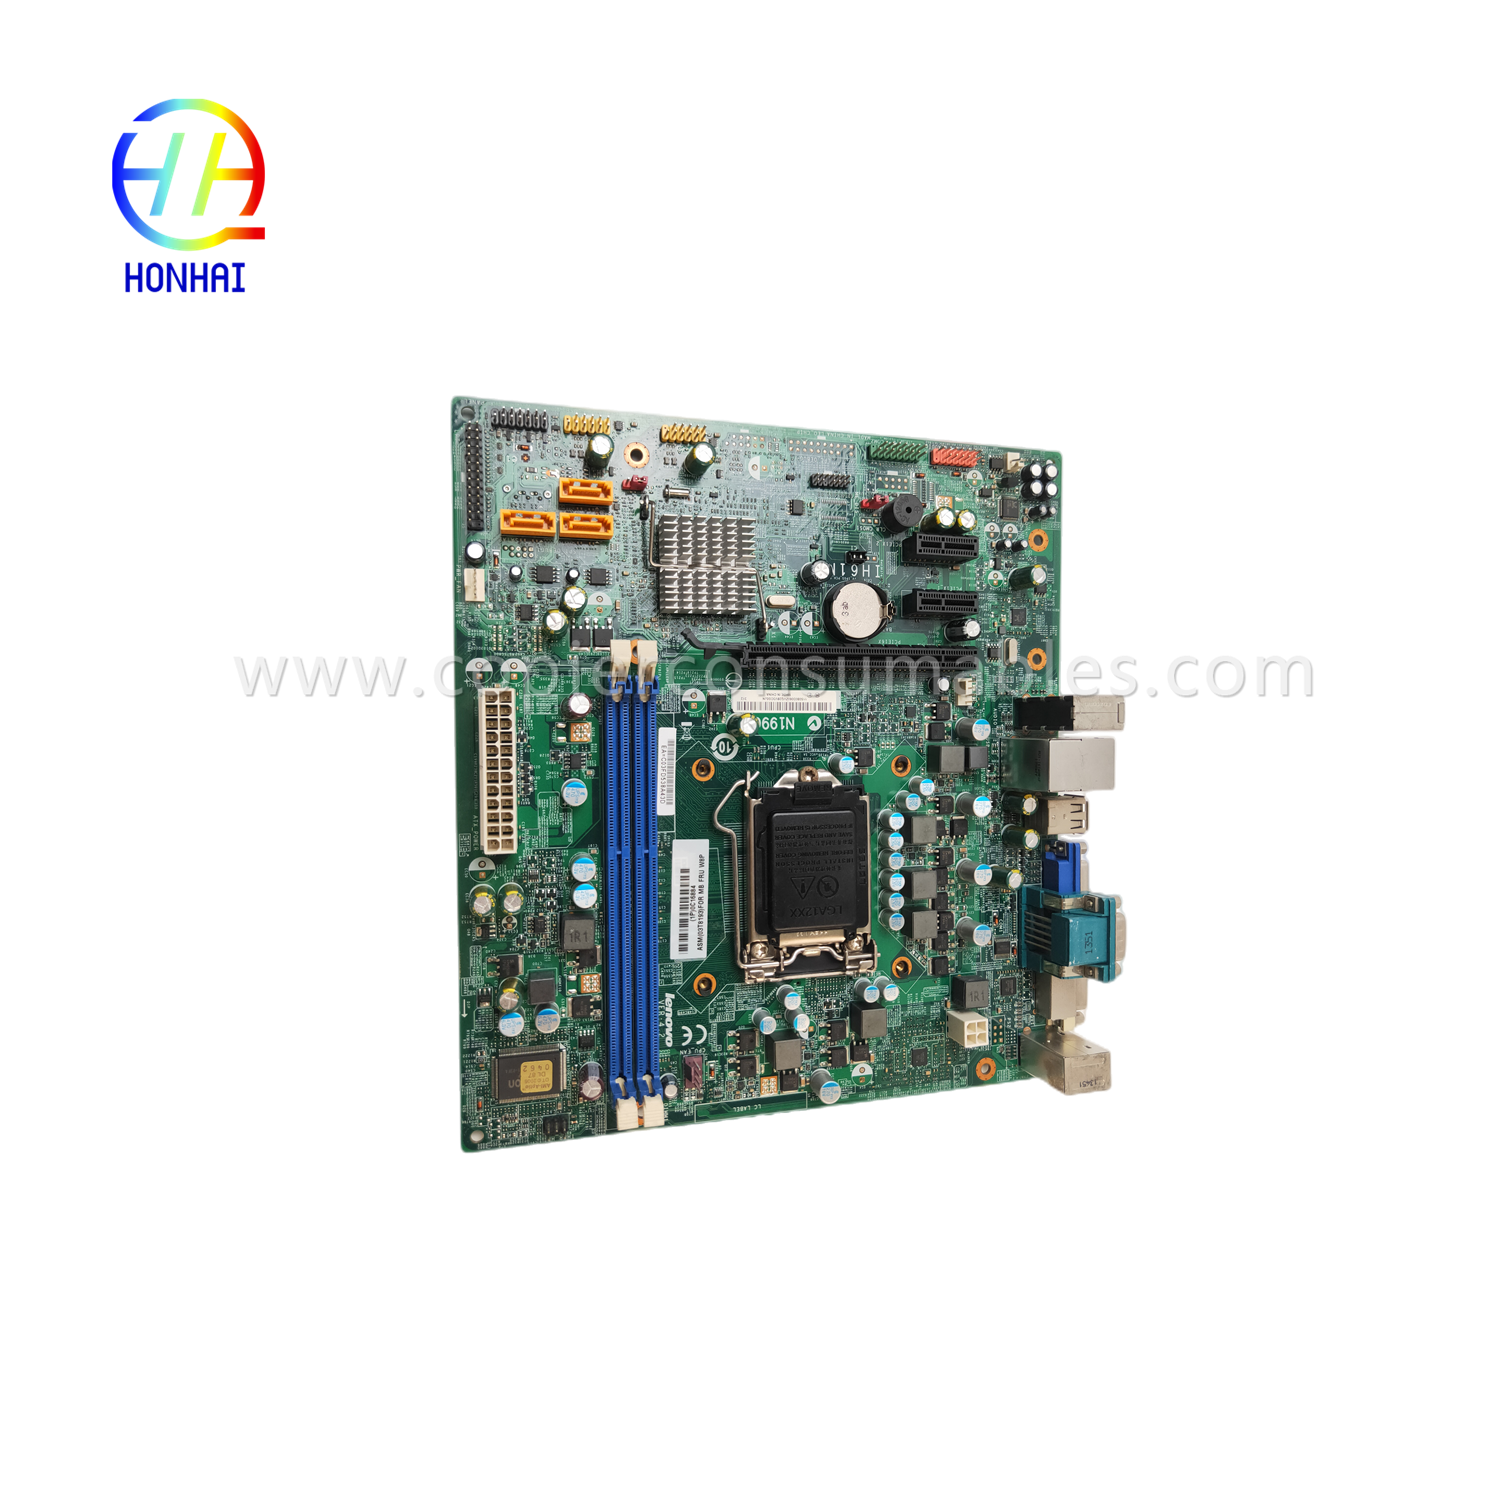 https://c585.goodao.net/motherboard-for-lenovo-thinkcentre-m72e-lga-1155-03t8193-systemboard-product/